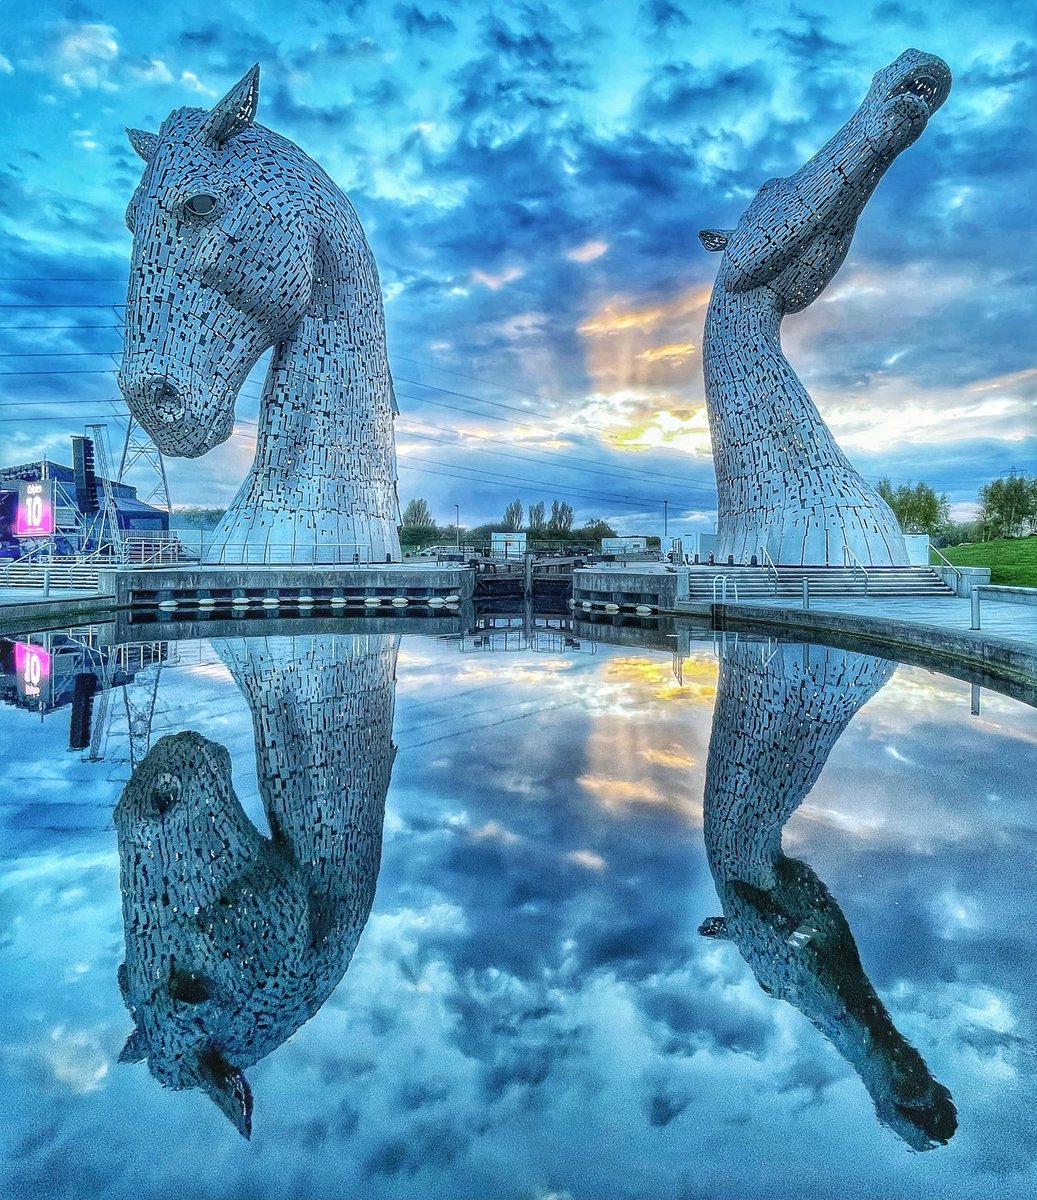 The #Kelpies and their reflections at blue hour on a pleasant evening in #Falkirk I had no idea of their size until tonight. Well worth the drive over from #Glasgow to see them for the first time. ⁦@StormHour⁩ ⁦@ThePhotoHour⁩ #Bluehour